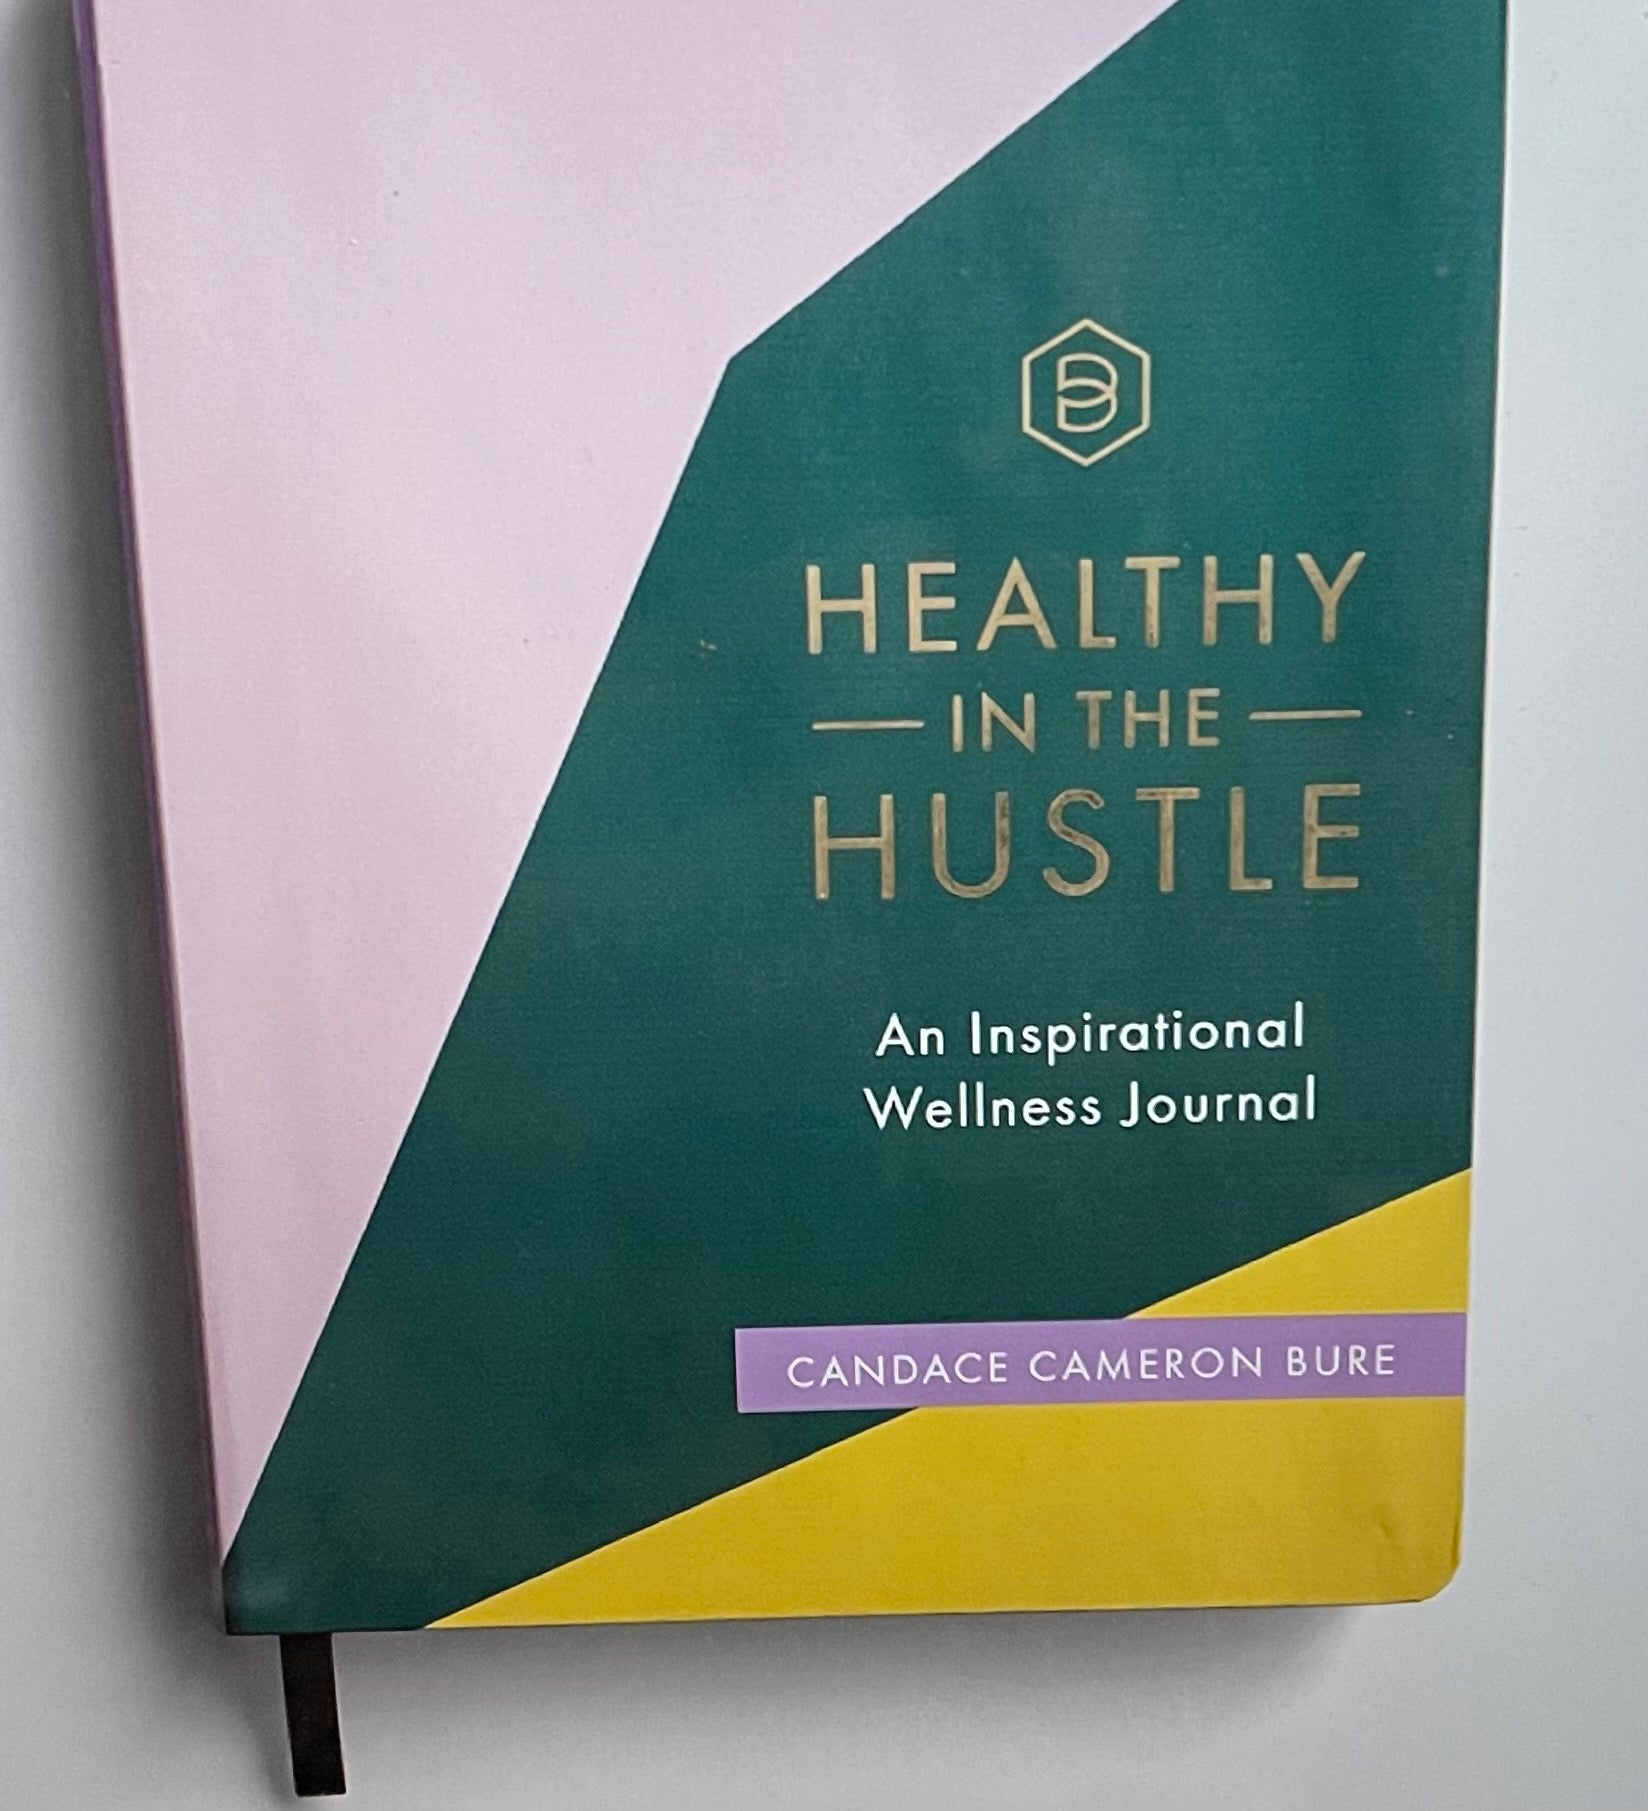 Candace Cameron Bure - Healthy in the Hustle: An Inspirational Wellness Journal